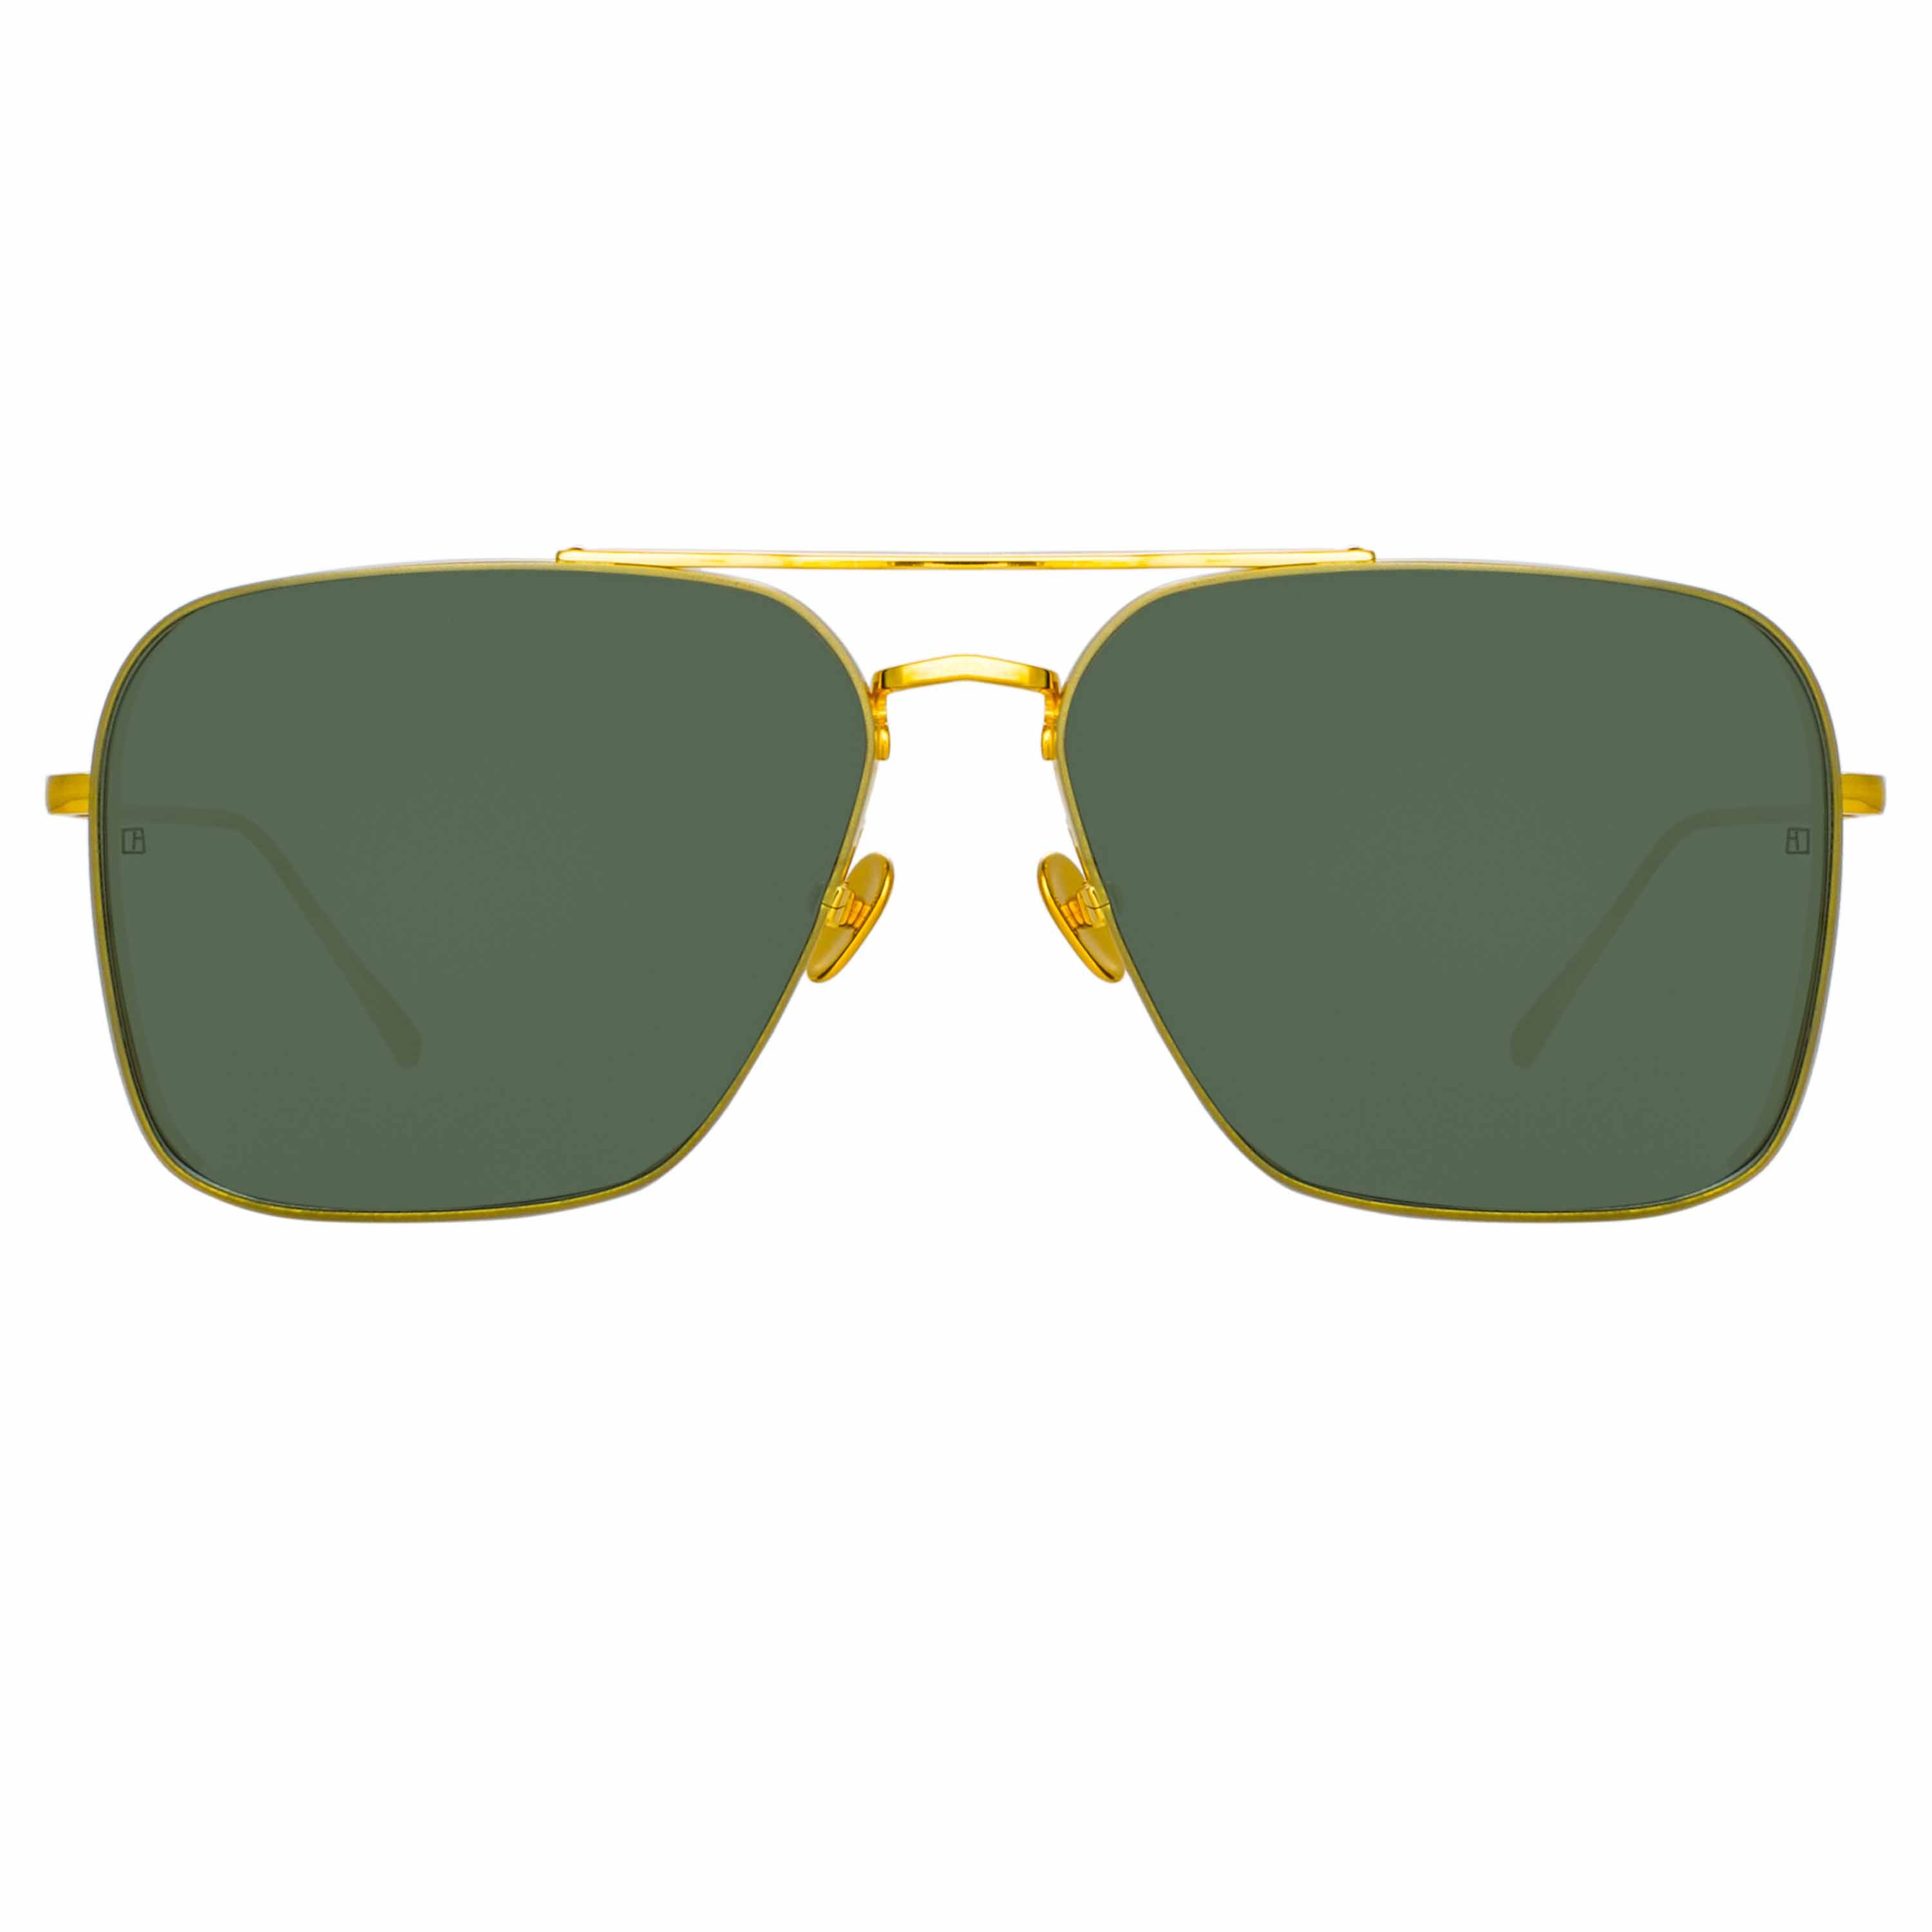 The Asher Asher Aviator Sunglasses in Yellow Gold Frame (C1)